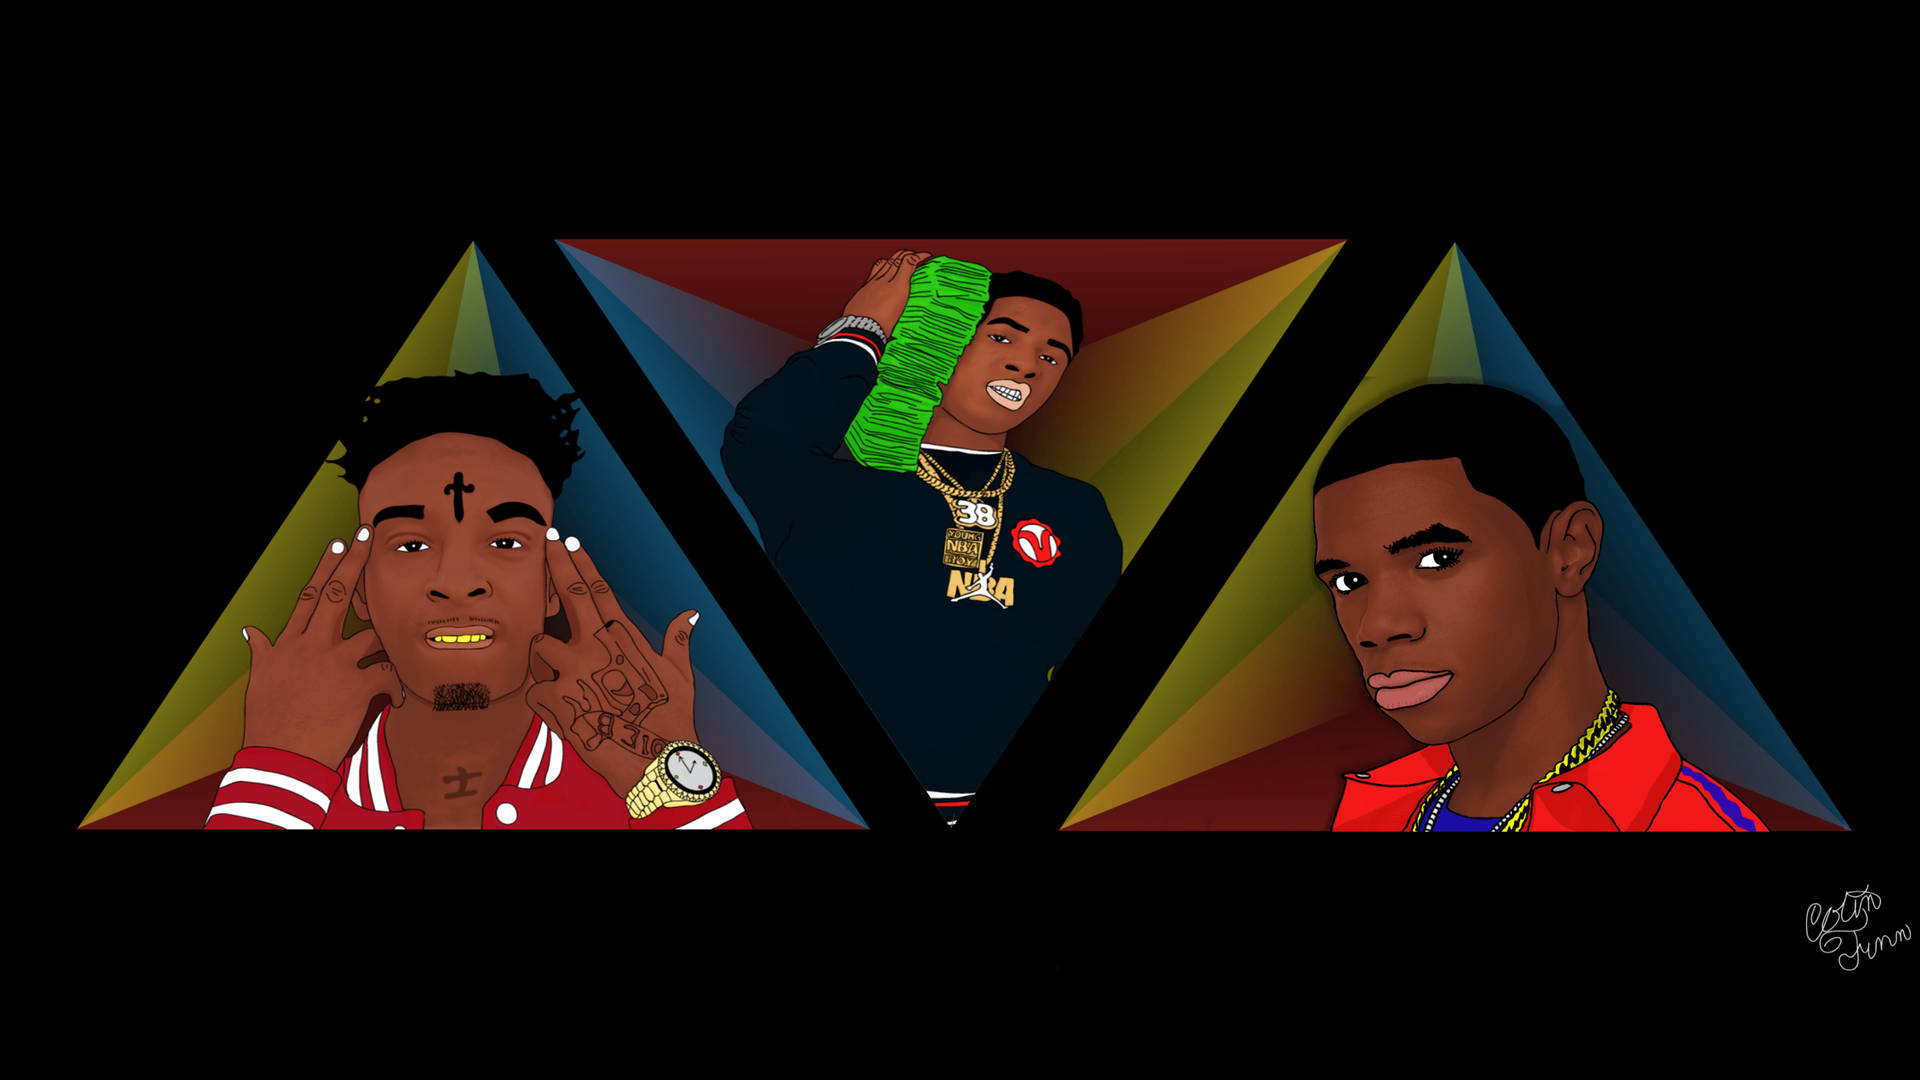 NBA Youngboy Bonding with Other Rappers in a Triangle Formation Wallpaper